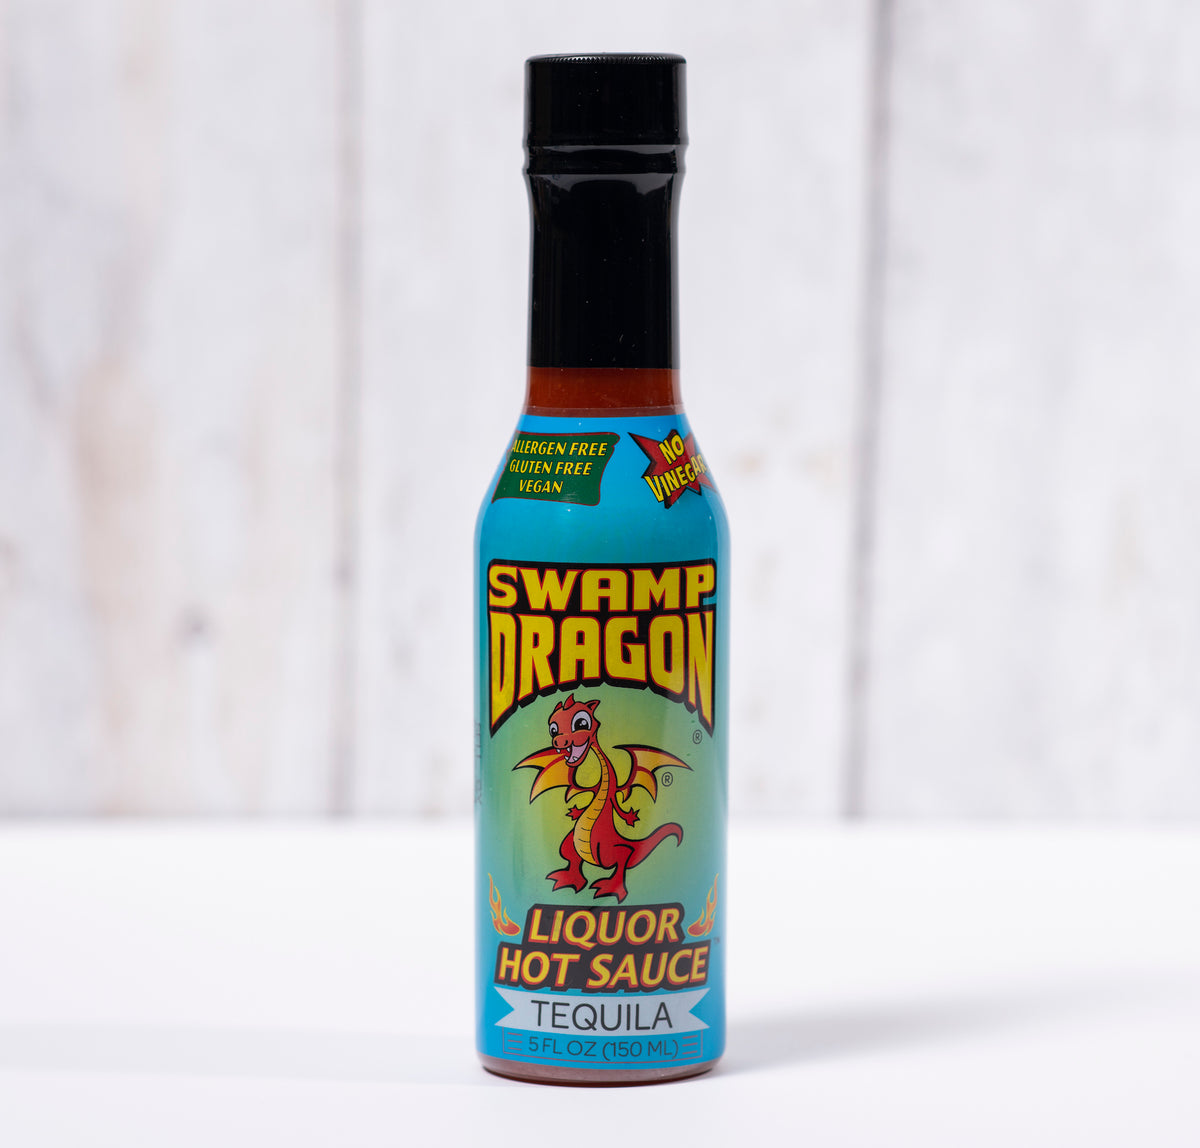 5 ounce bottle of Swamp Dragon Tequila Hot Sauce